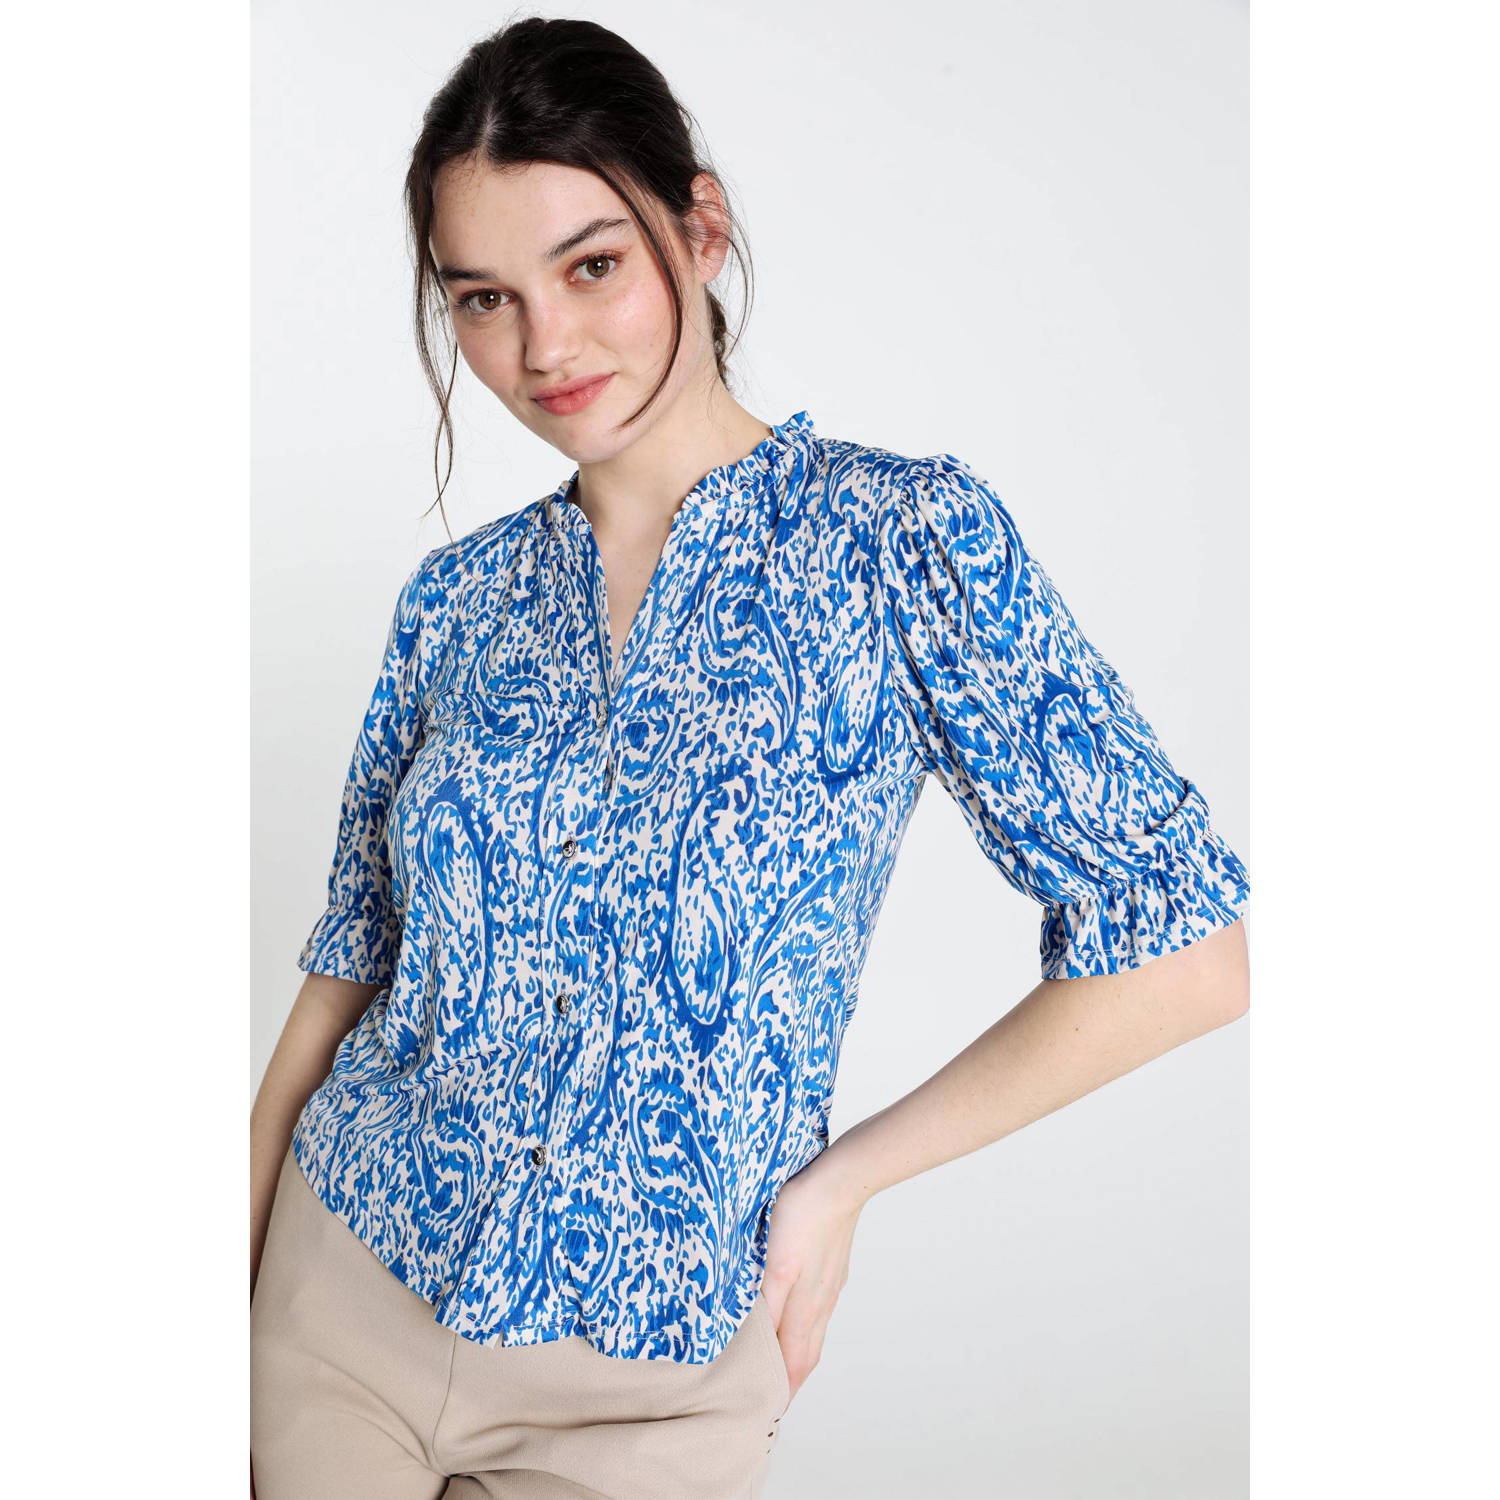 Cassis blouse met all over print blauw wit